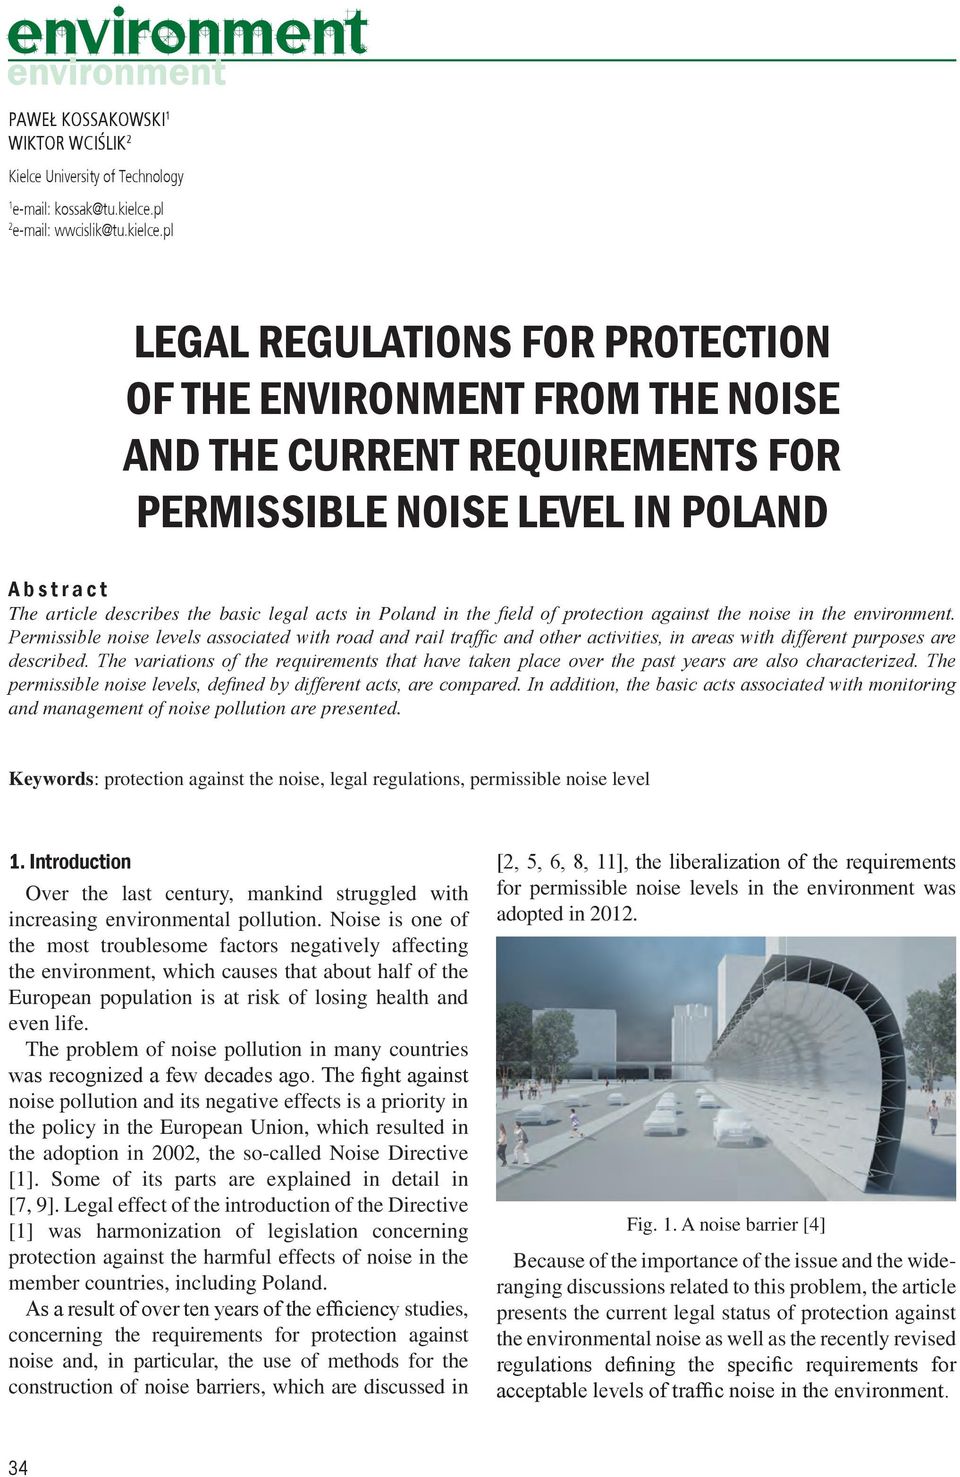 pl LEGAL REGULATIONS FOR PROTECTION OF THE ENVIRONMENT FROM THE NOISE AND THE CURRENT REQUIREMENTS FOR PERMISSIBLE NOISE LEVEL IN POLAND A b s t r a c t The article describes the basic legal acts in